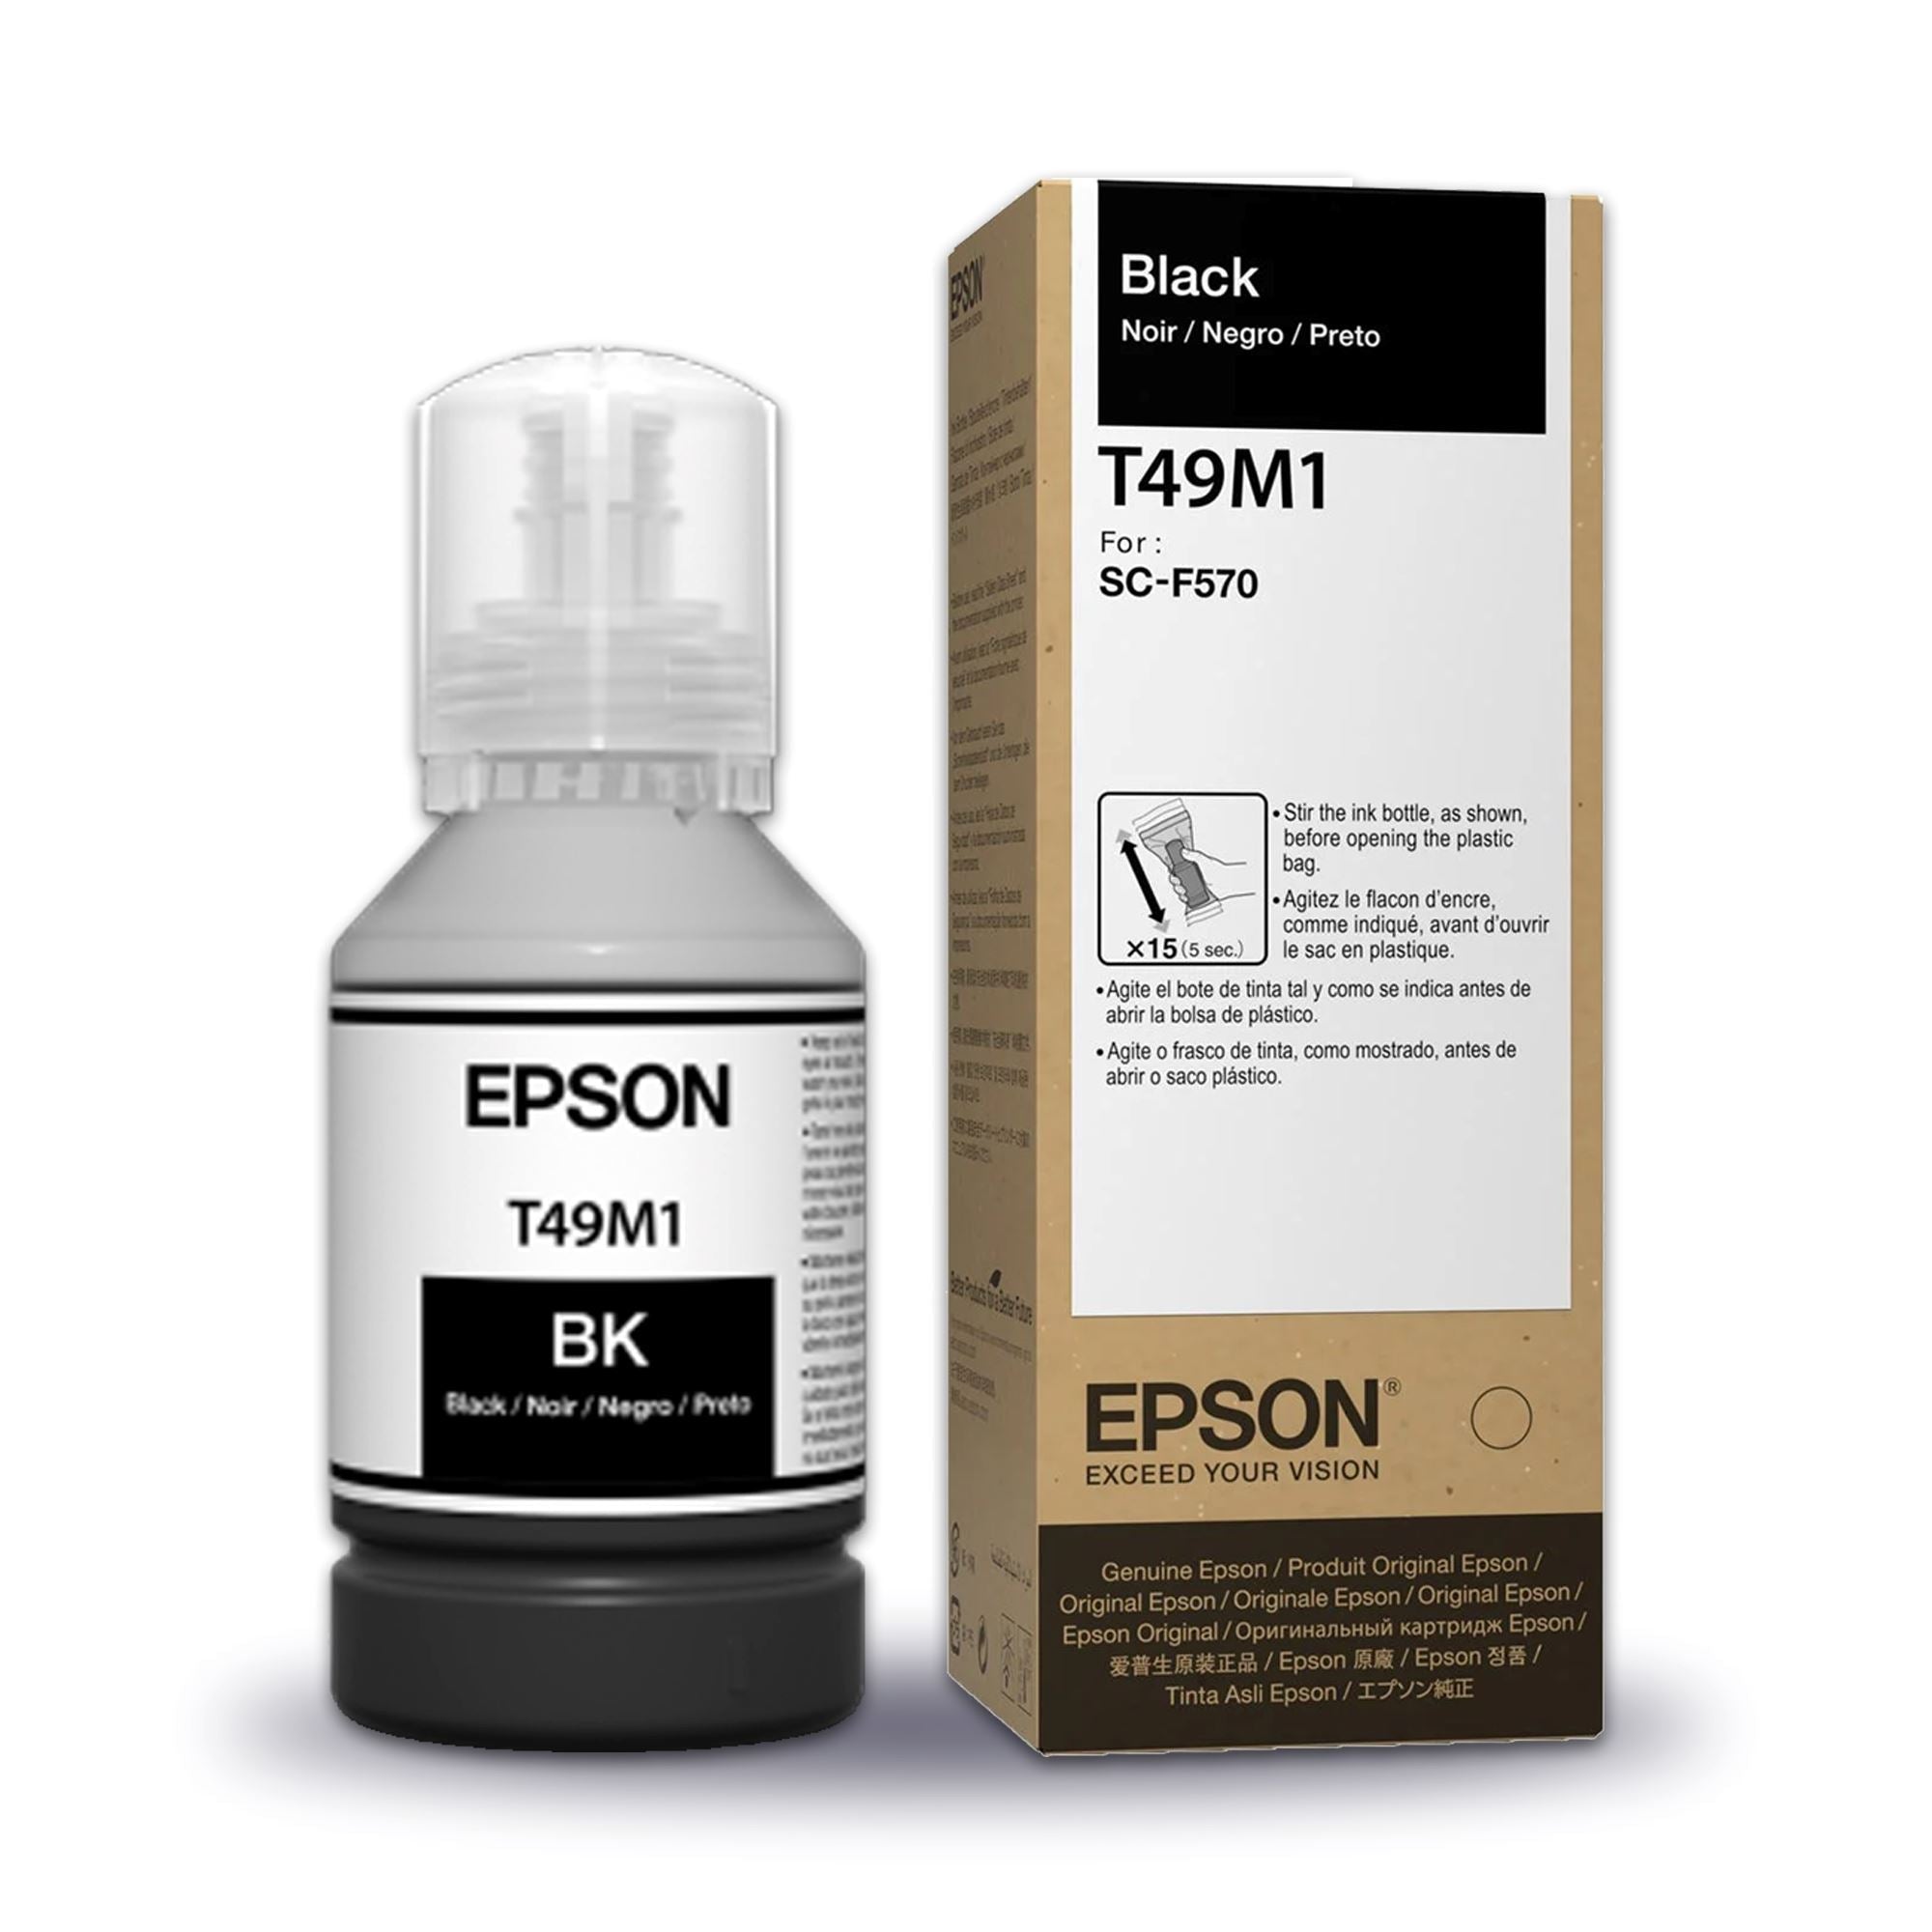 Epson F570 DS Transfer Multi Use Paper 8.5 x 11 - 200 Sheets